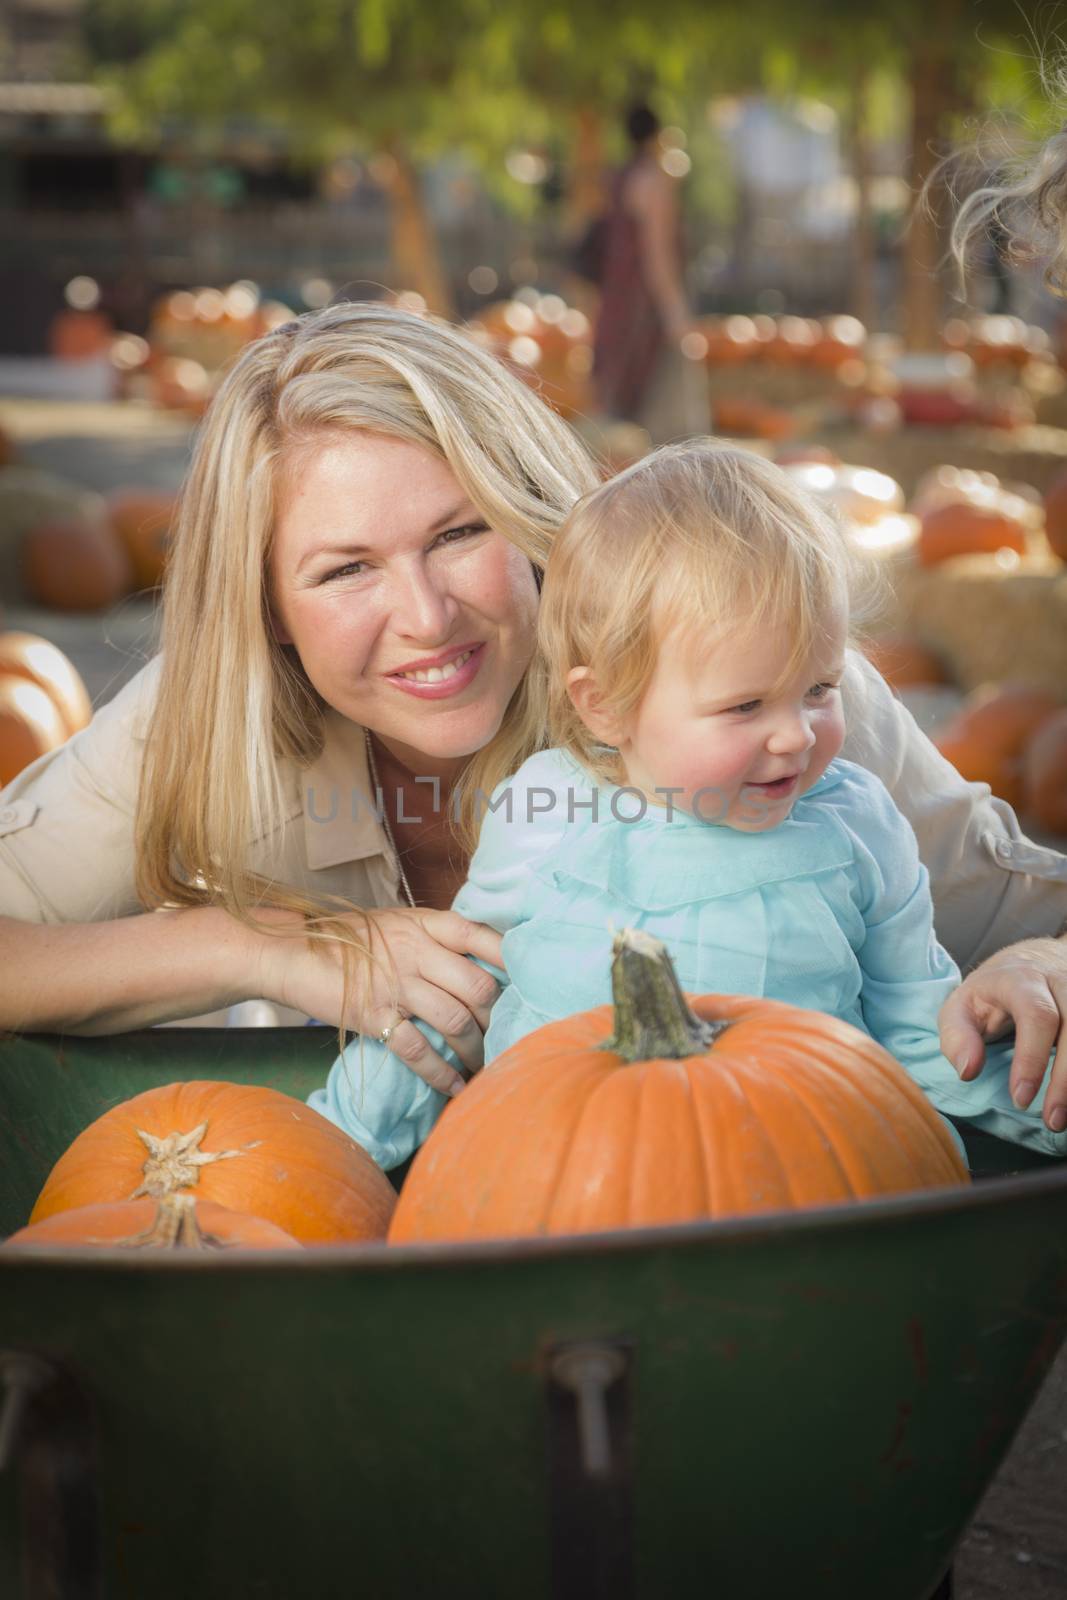 Adorable Young Mother and Daughter Enjoys a Day at the Pumpkin Patch.